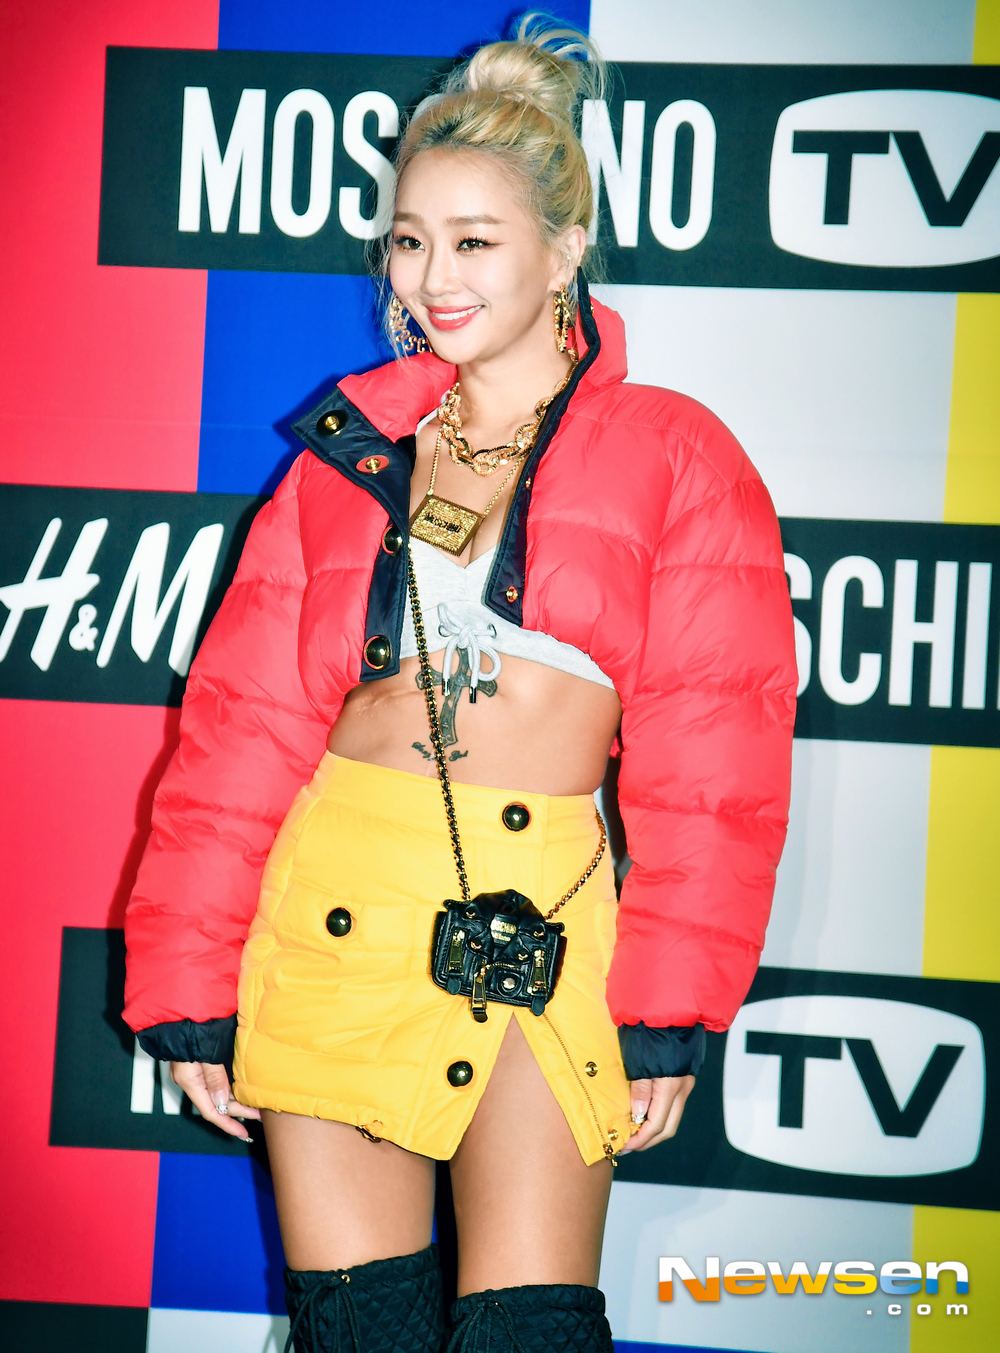 The collaboration launch of the mother fashion brand Party was held at Seongsu-dong Layer 57 on the afternoon of November 6.Singer Sandara Park, Hyolyn, Hyoyeon (Girls Generation), L (Infinit), N (Bix), Bong Jae-hyun (Goldchild) Actor Ha Yeon-soo and Jung Yeon-ju attended the ceremony.